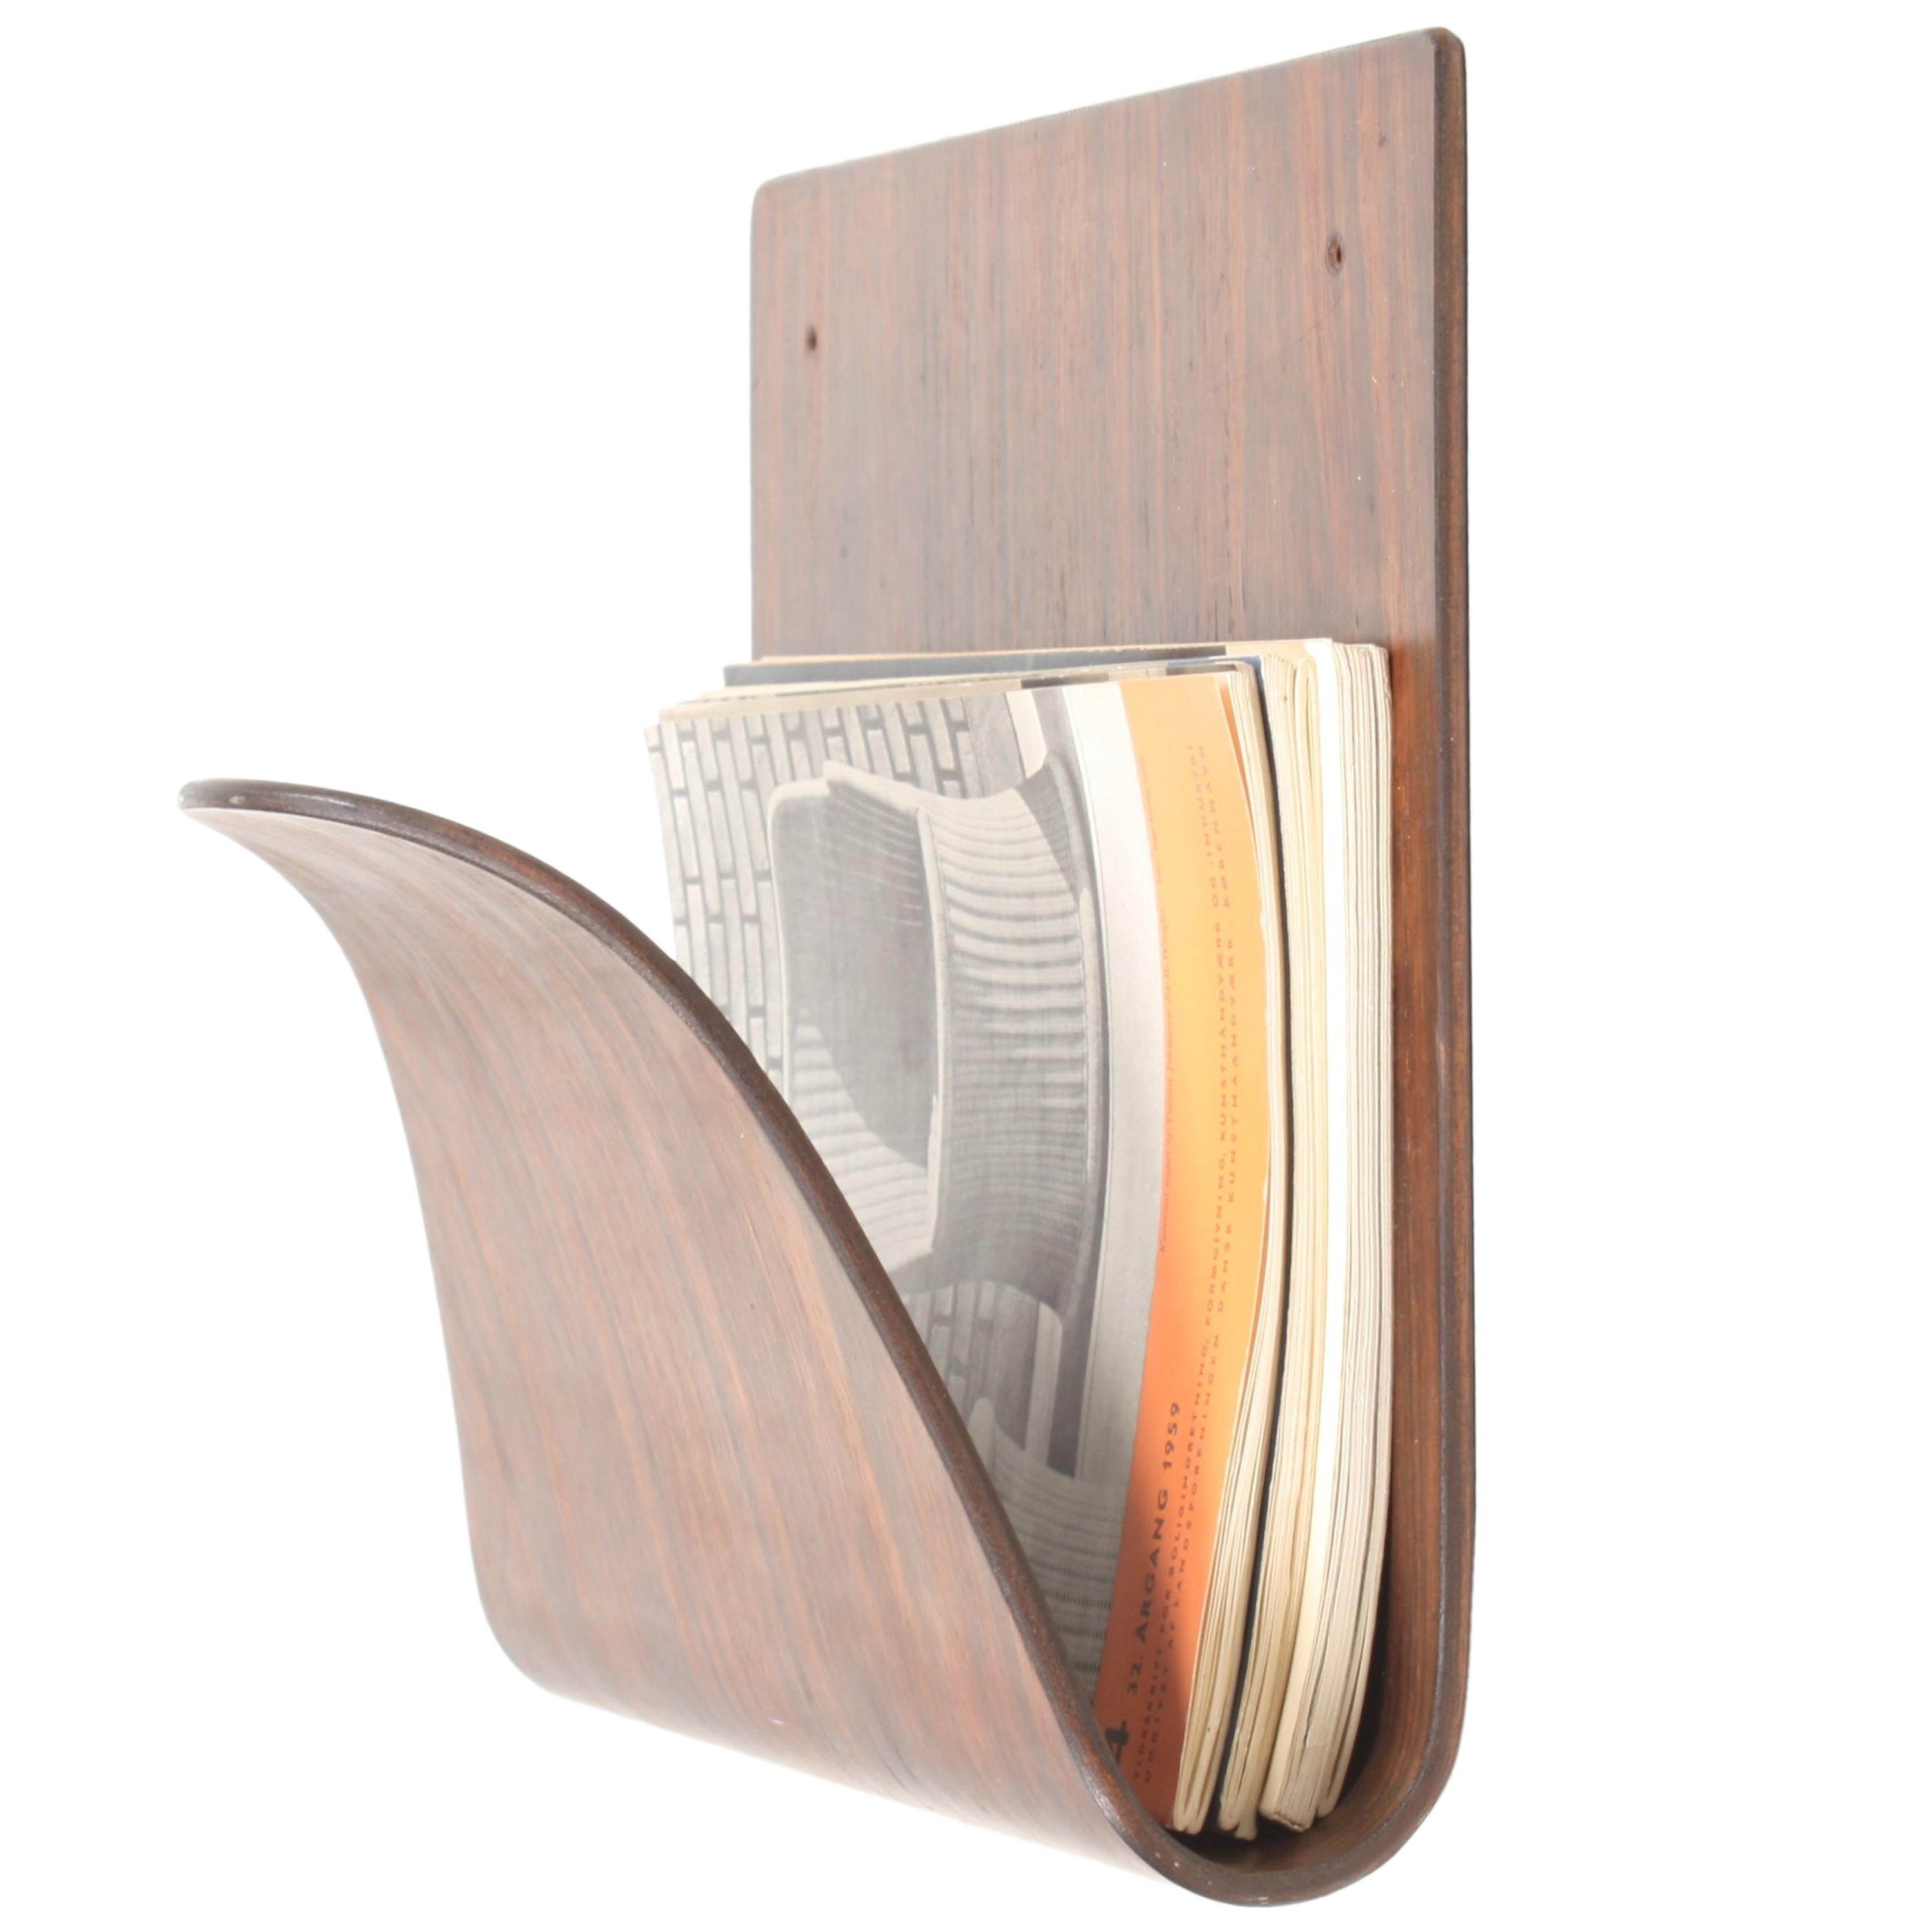 Midcentury Tongue Shaped Magazine Holder for the Wall, Danish, 1950s For Sale